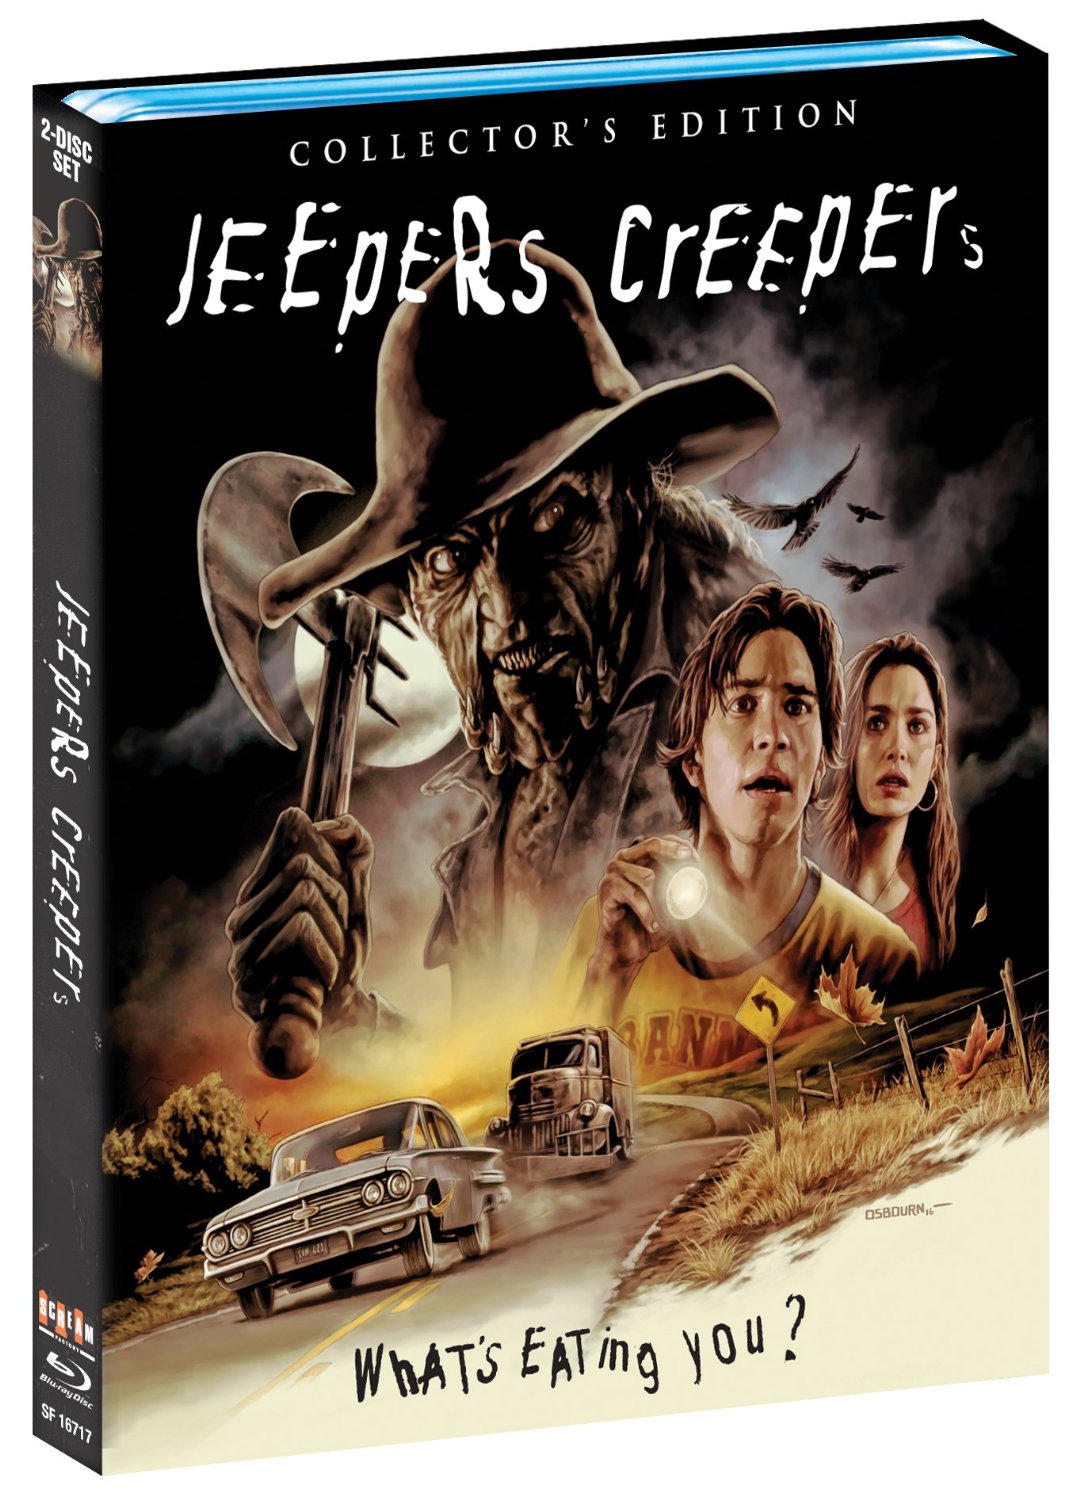 jeepers creepers movie genre